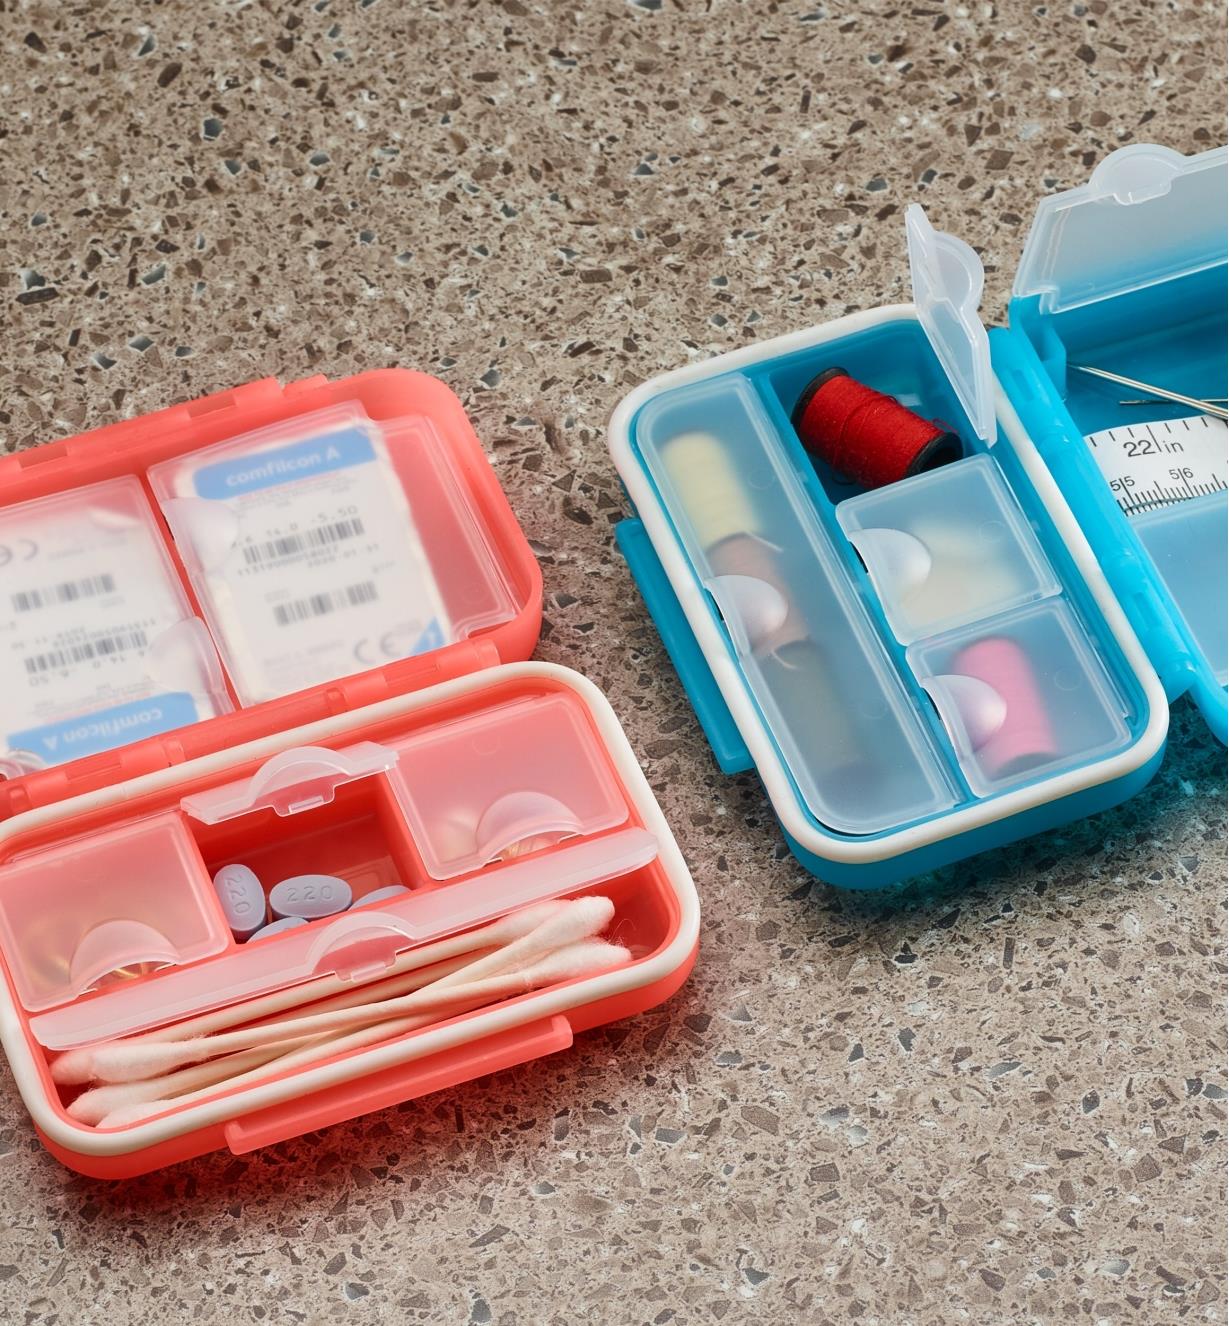 Two Locking Pocket Cases filled with sewing and first aid supplies